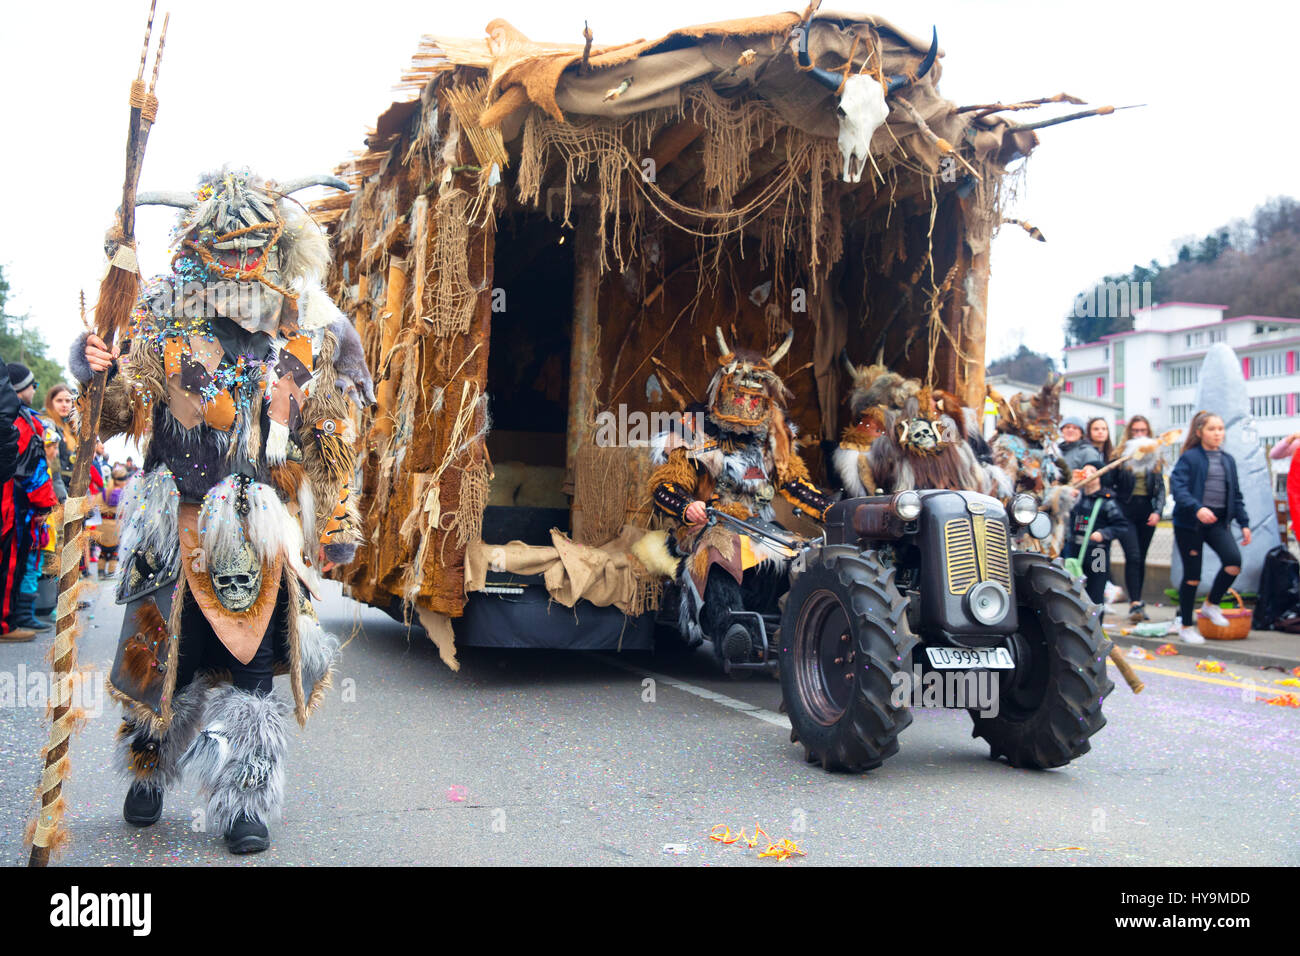 Traditional carnival parade of carnival masks in Luzern, Switzerland. Stock Photo